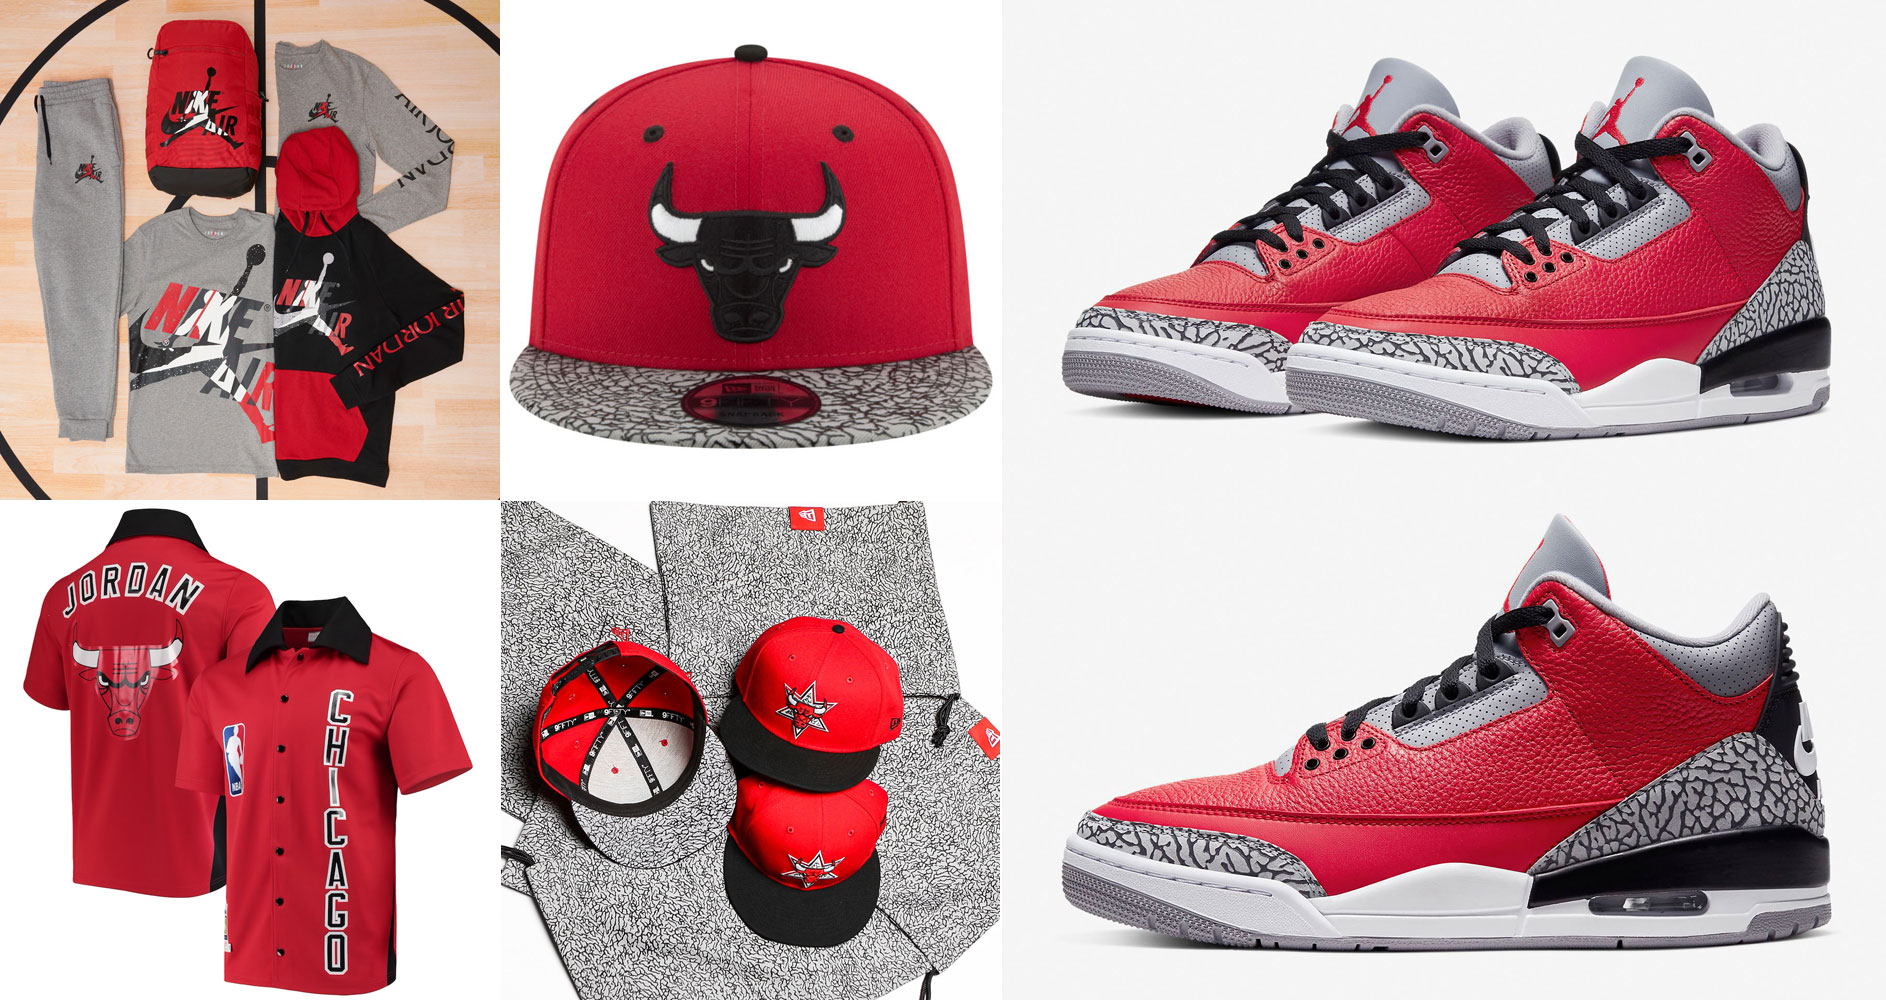 Air Jordan 3 Red Cement Clothing and 